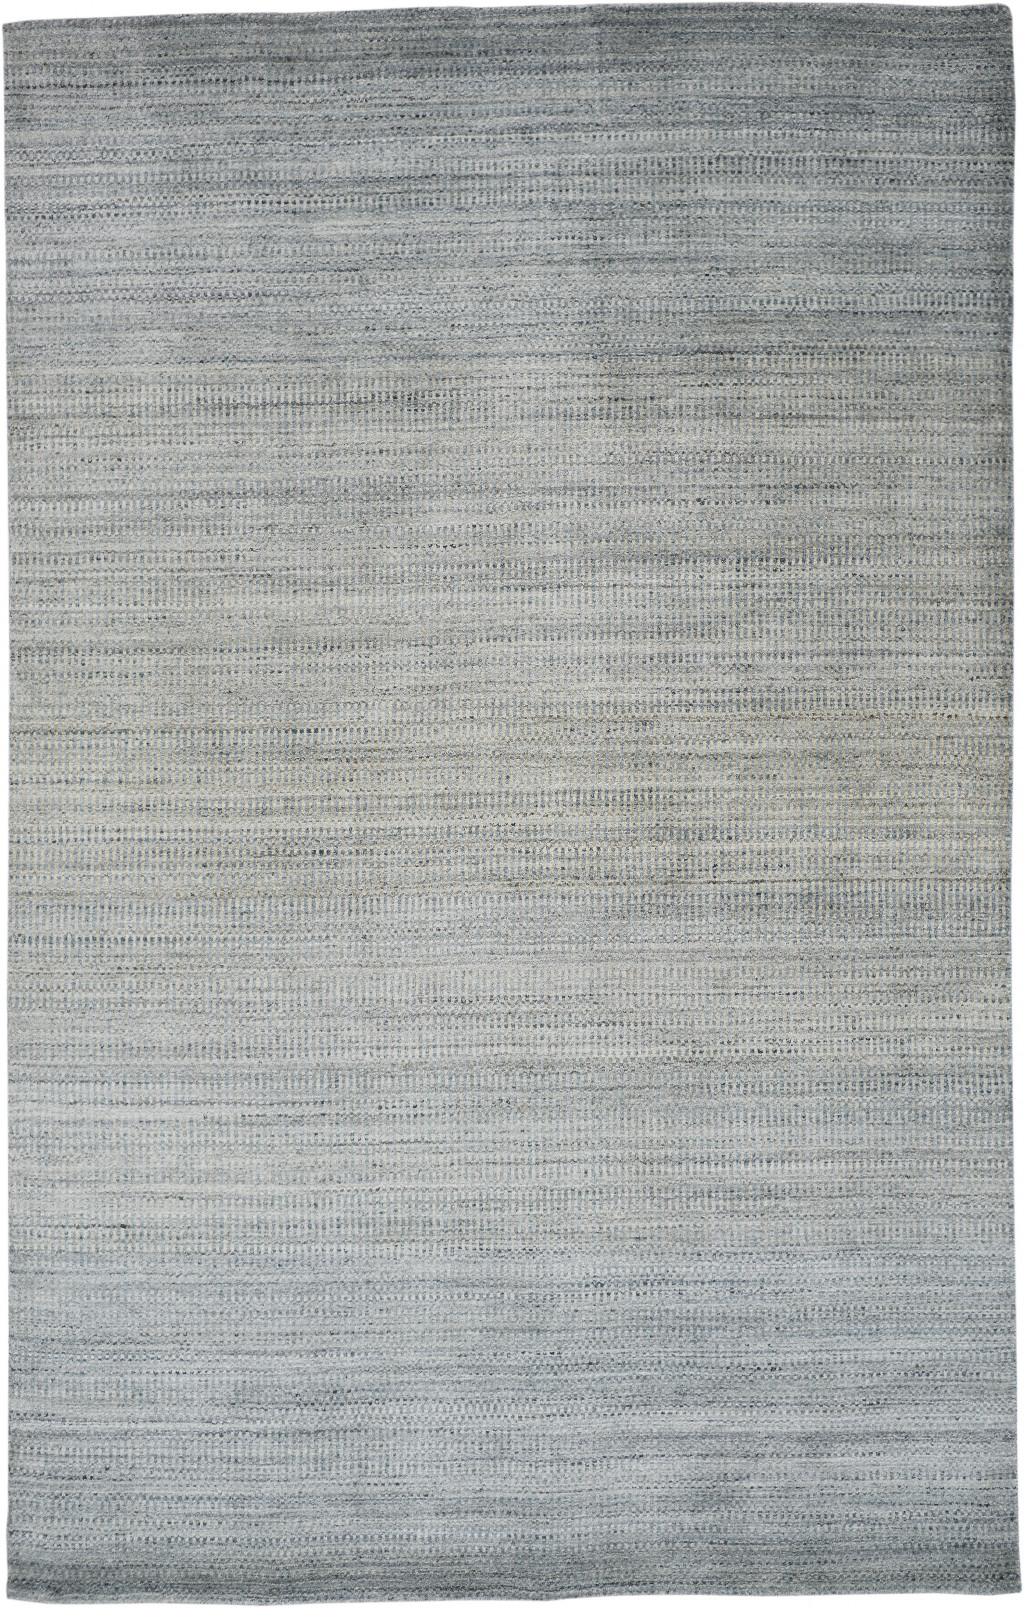 2' X 3' Blue And Gray Ombre Hand Woven Area Rug-511735-1